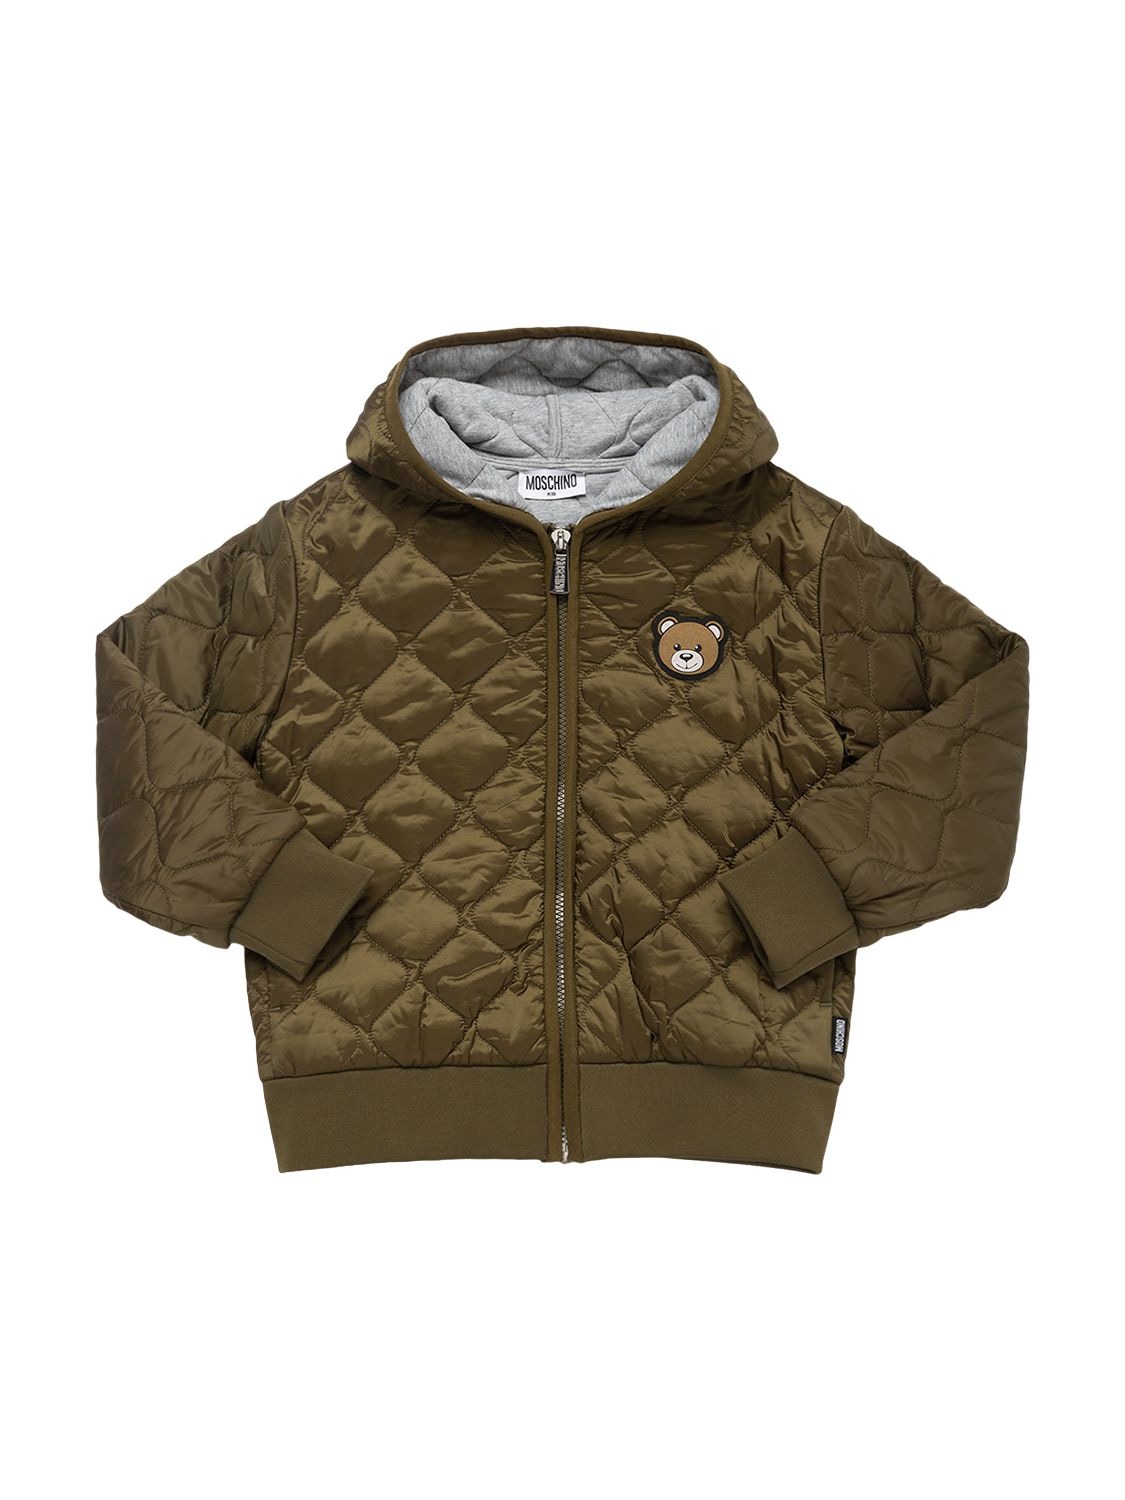 Moschino Kids' Quilted Nylon Jacket W/logo In Military Green